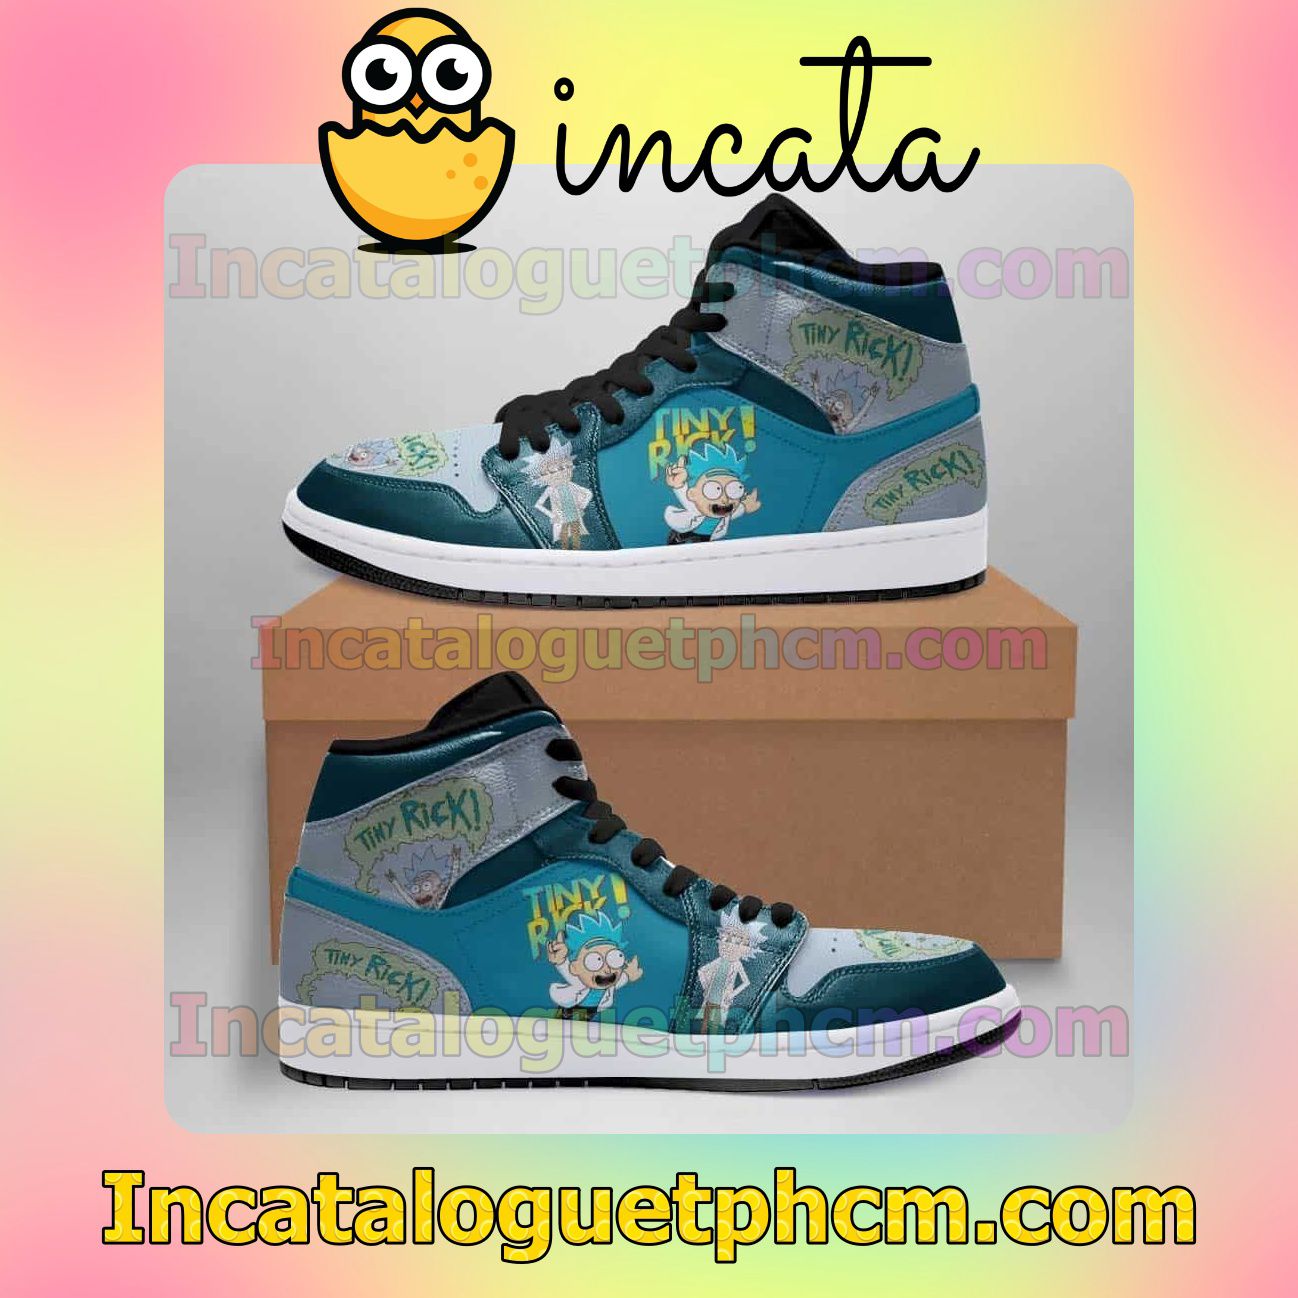 Tiny Rick And Morty 1s Air Jordan 1 Inspired Shoes